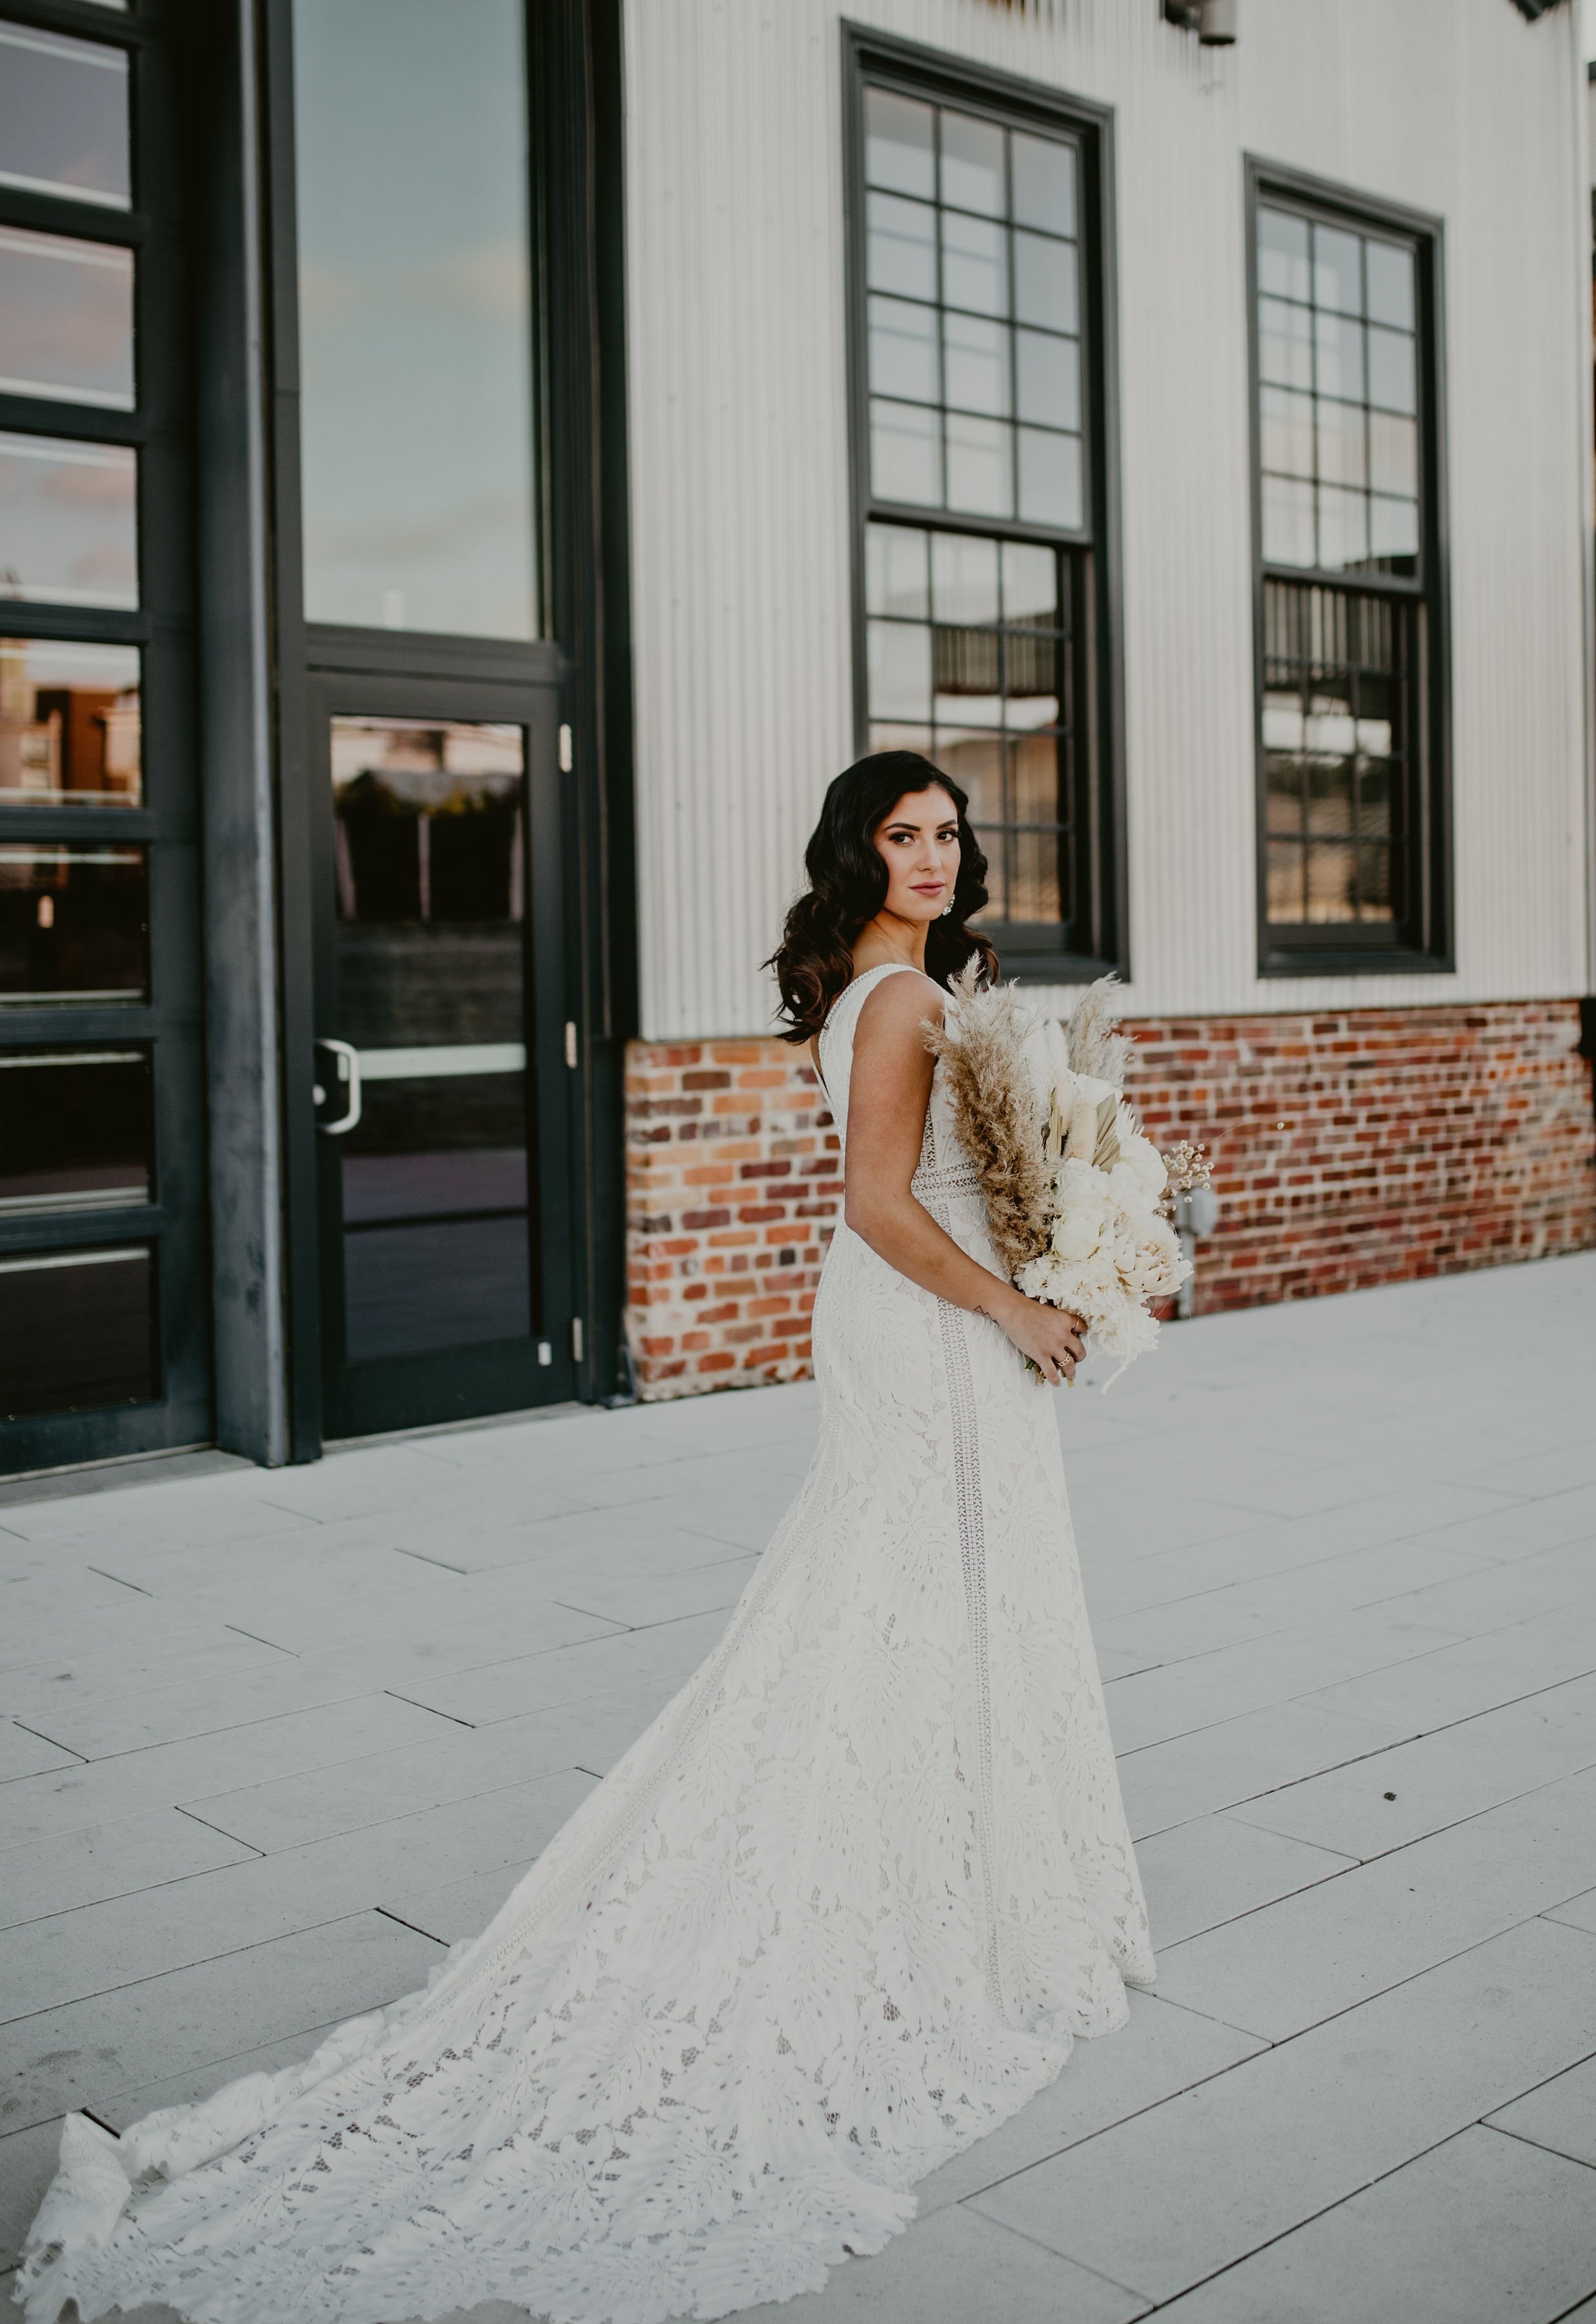 ivory-and-beau-blog-down-for-the-gown-spencer-real-bride-real-wedding-savannah-wedding-southern-bride-southern-wedding-kehoe-iron-works-bridal-gown-maggie-sottero-wedding-dress-bridal-boutique-savannah-georgia-IMG_4435.jpg